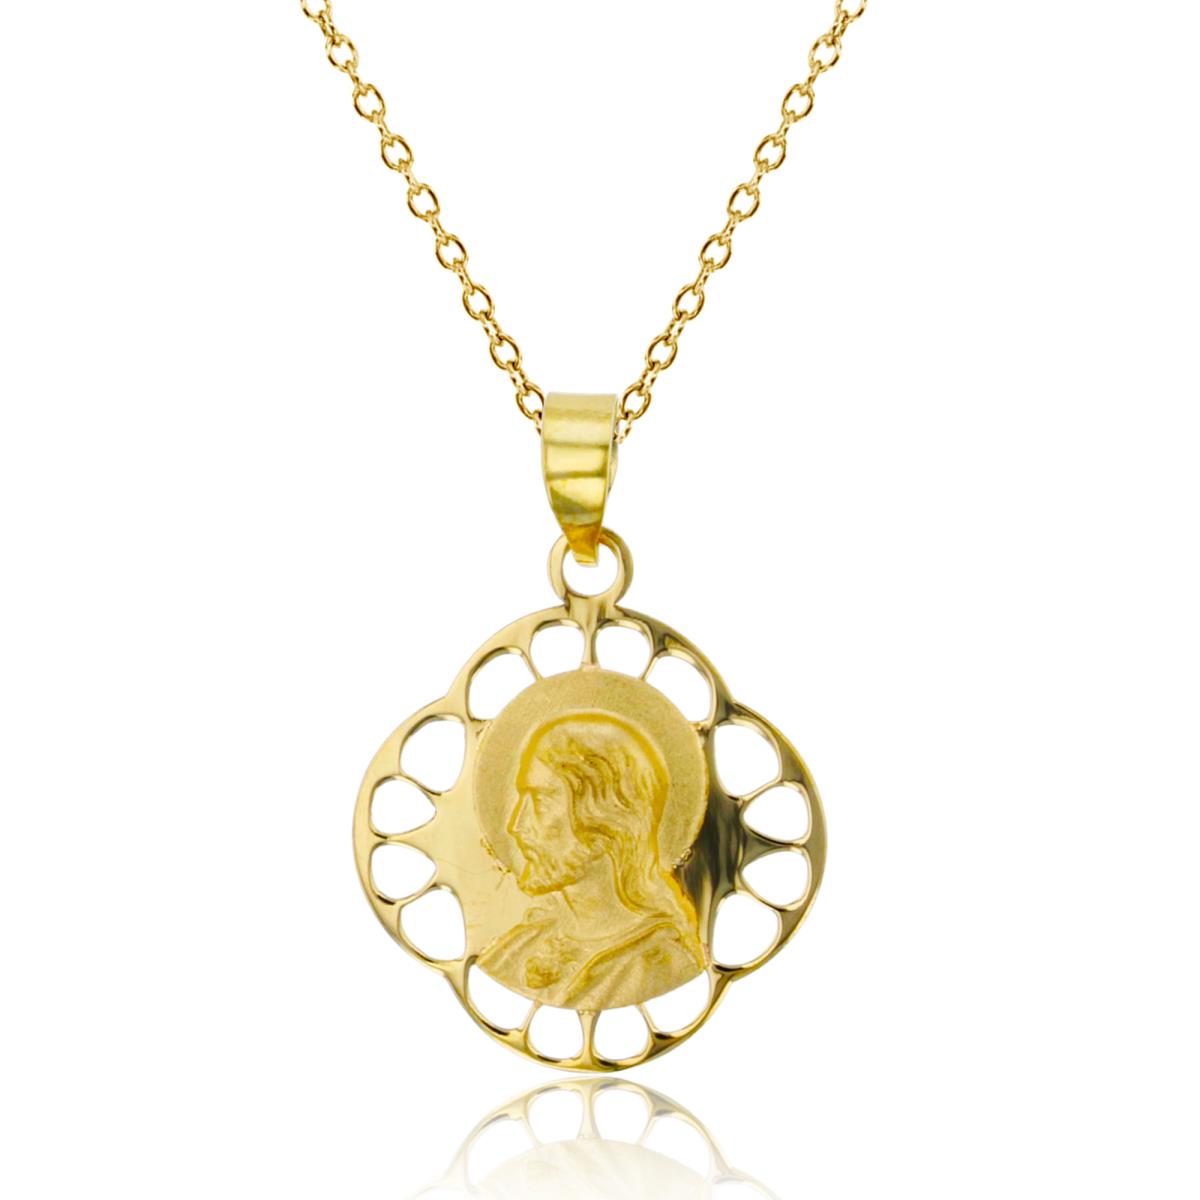 10K Yellow Gold Sacred Heart of Jesus Honeycomb Design 18" Necklace